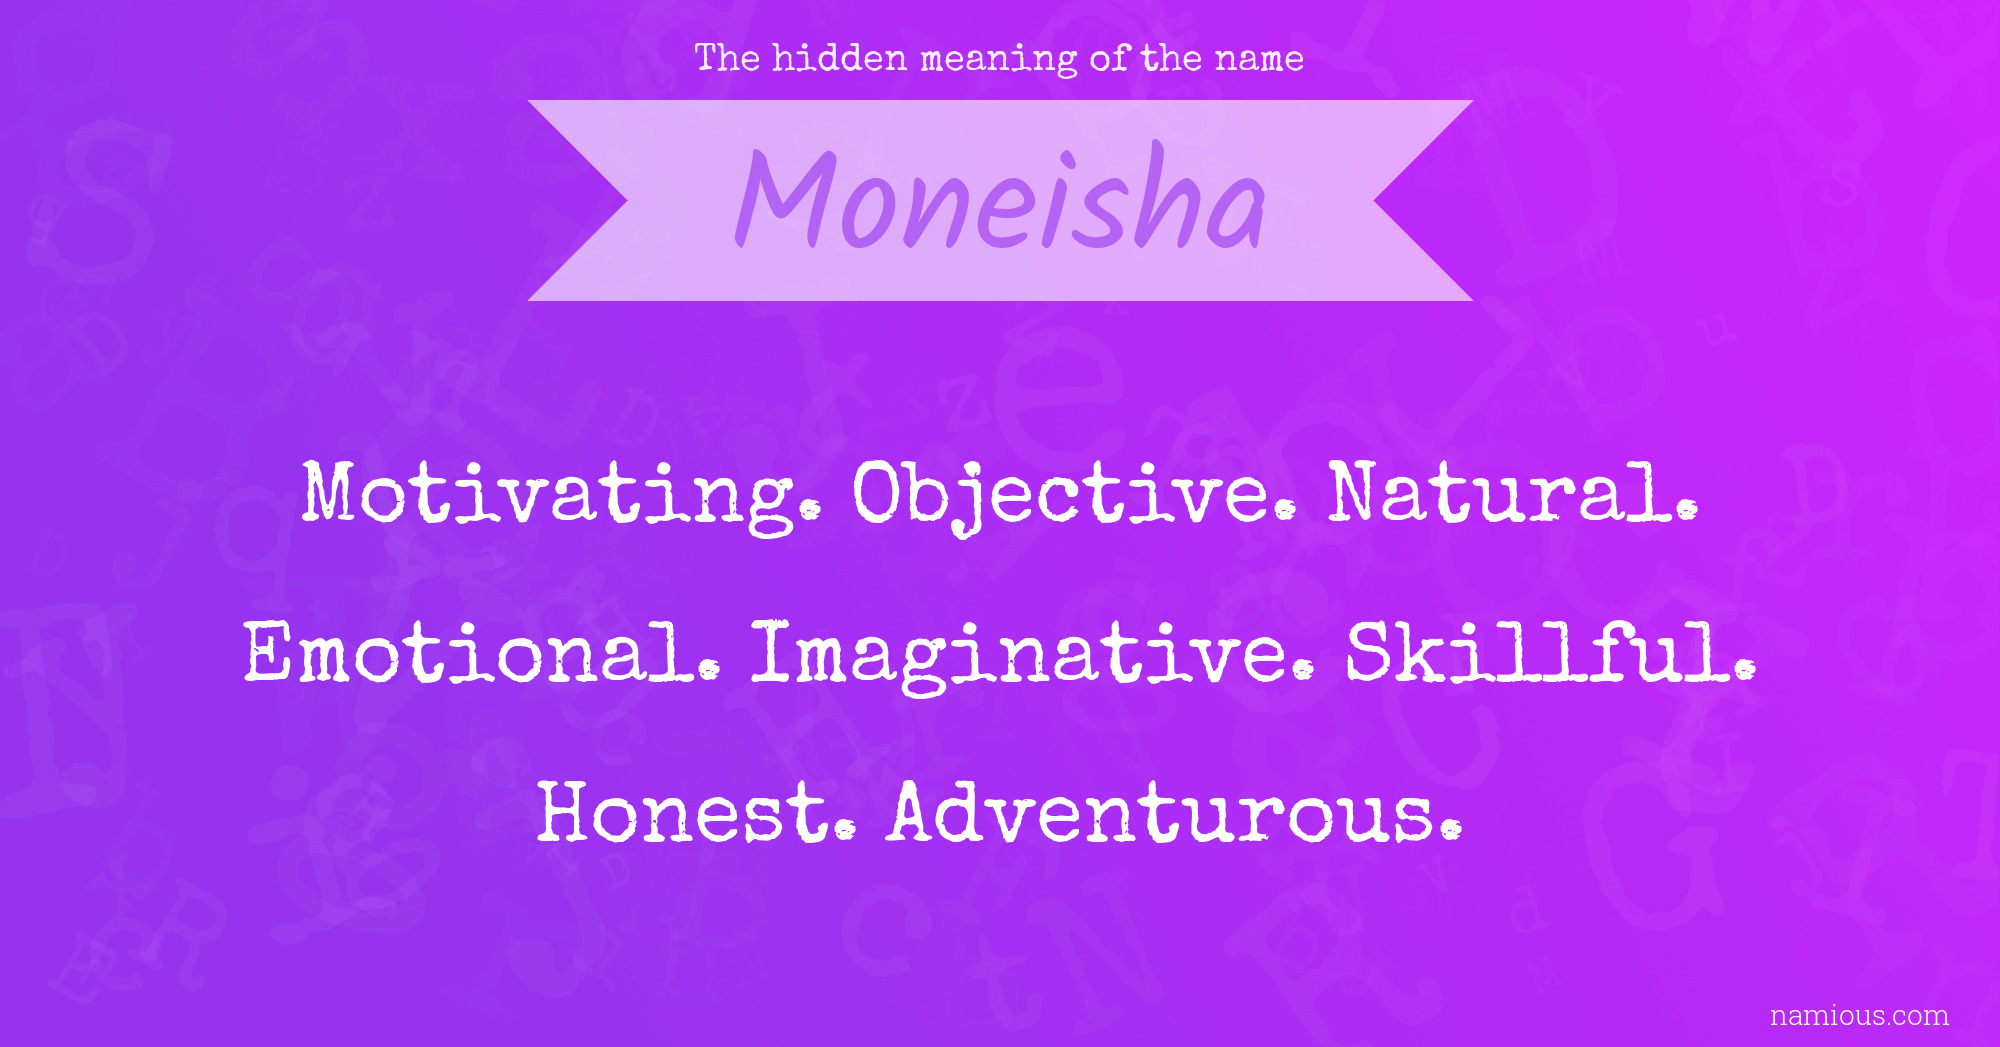 The hidden meaning of the name Moneisha